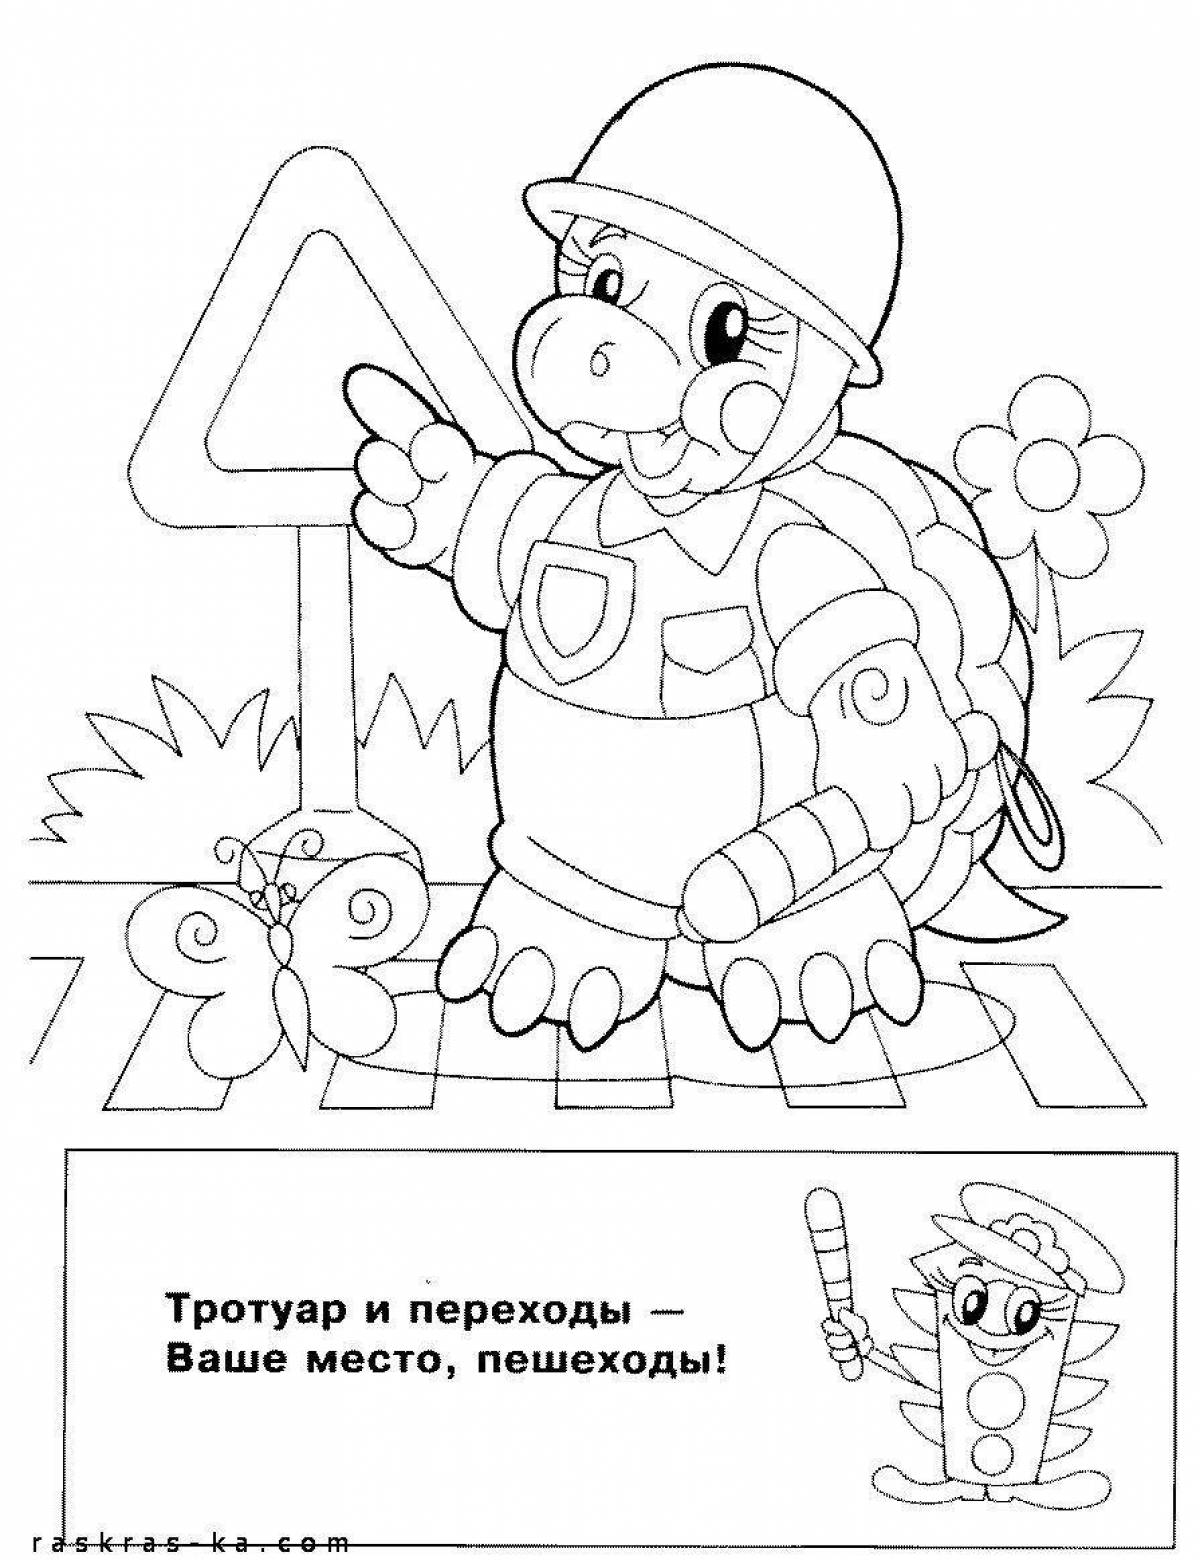 Creative safety coloring book for 6-7 year olds